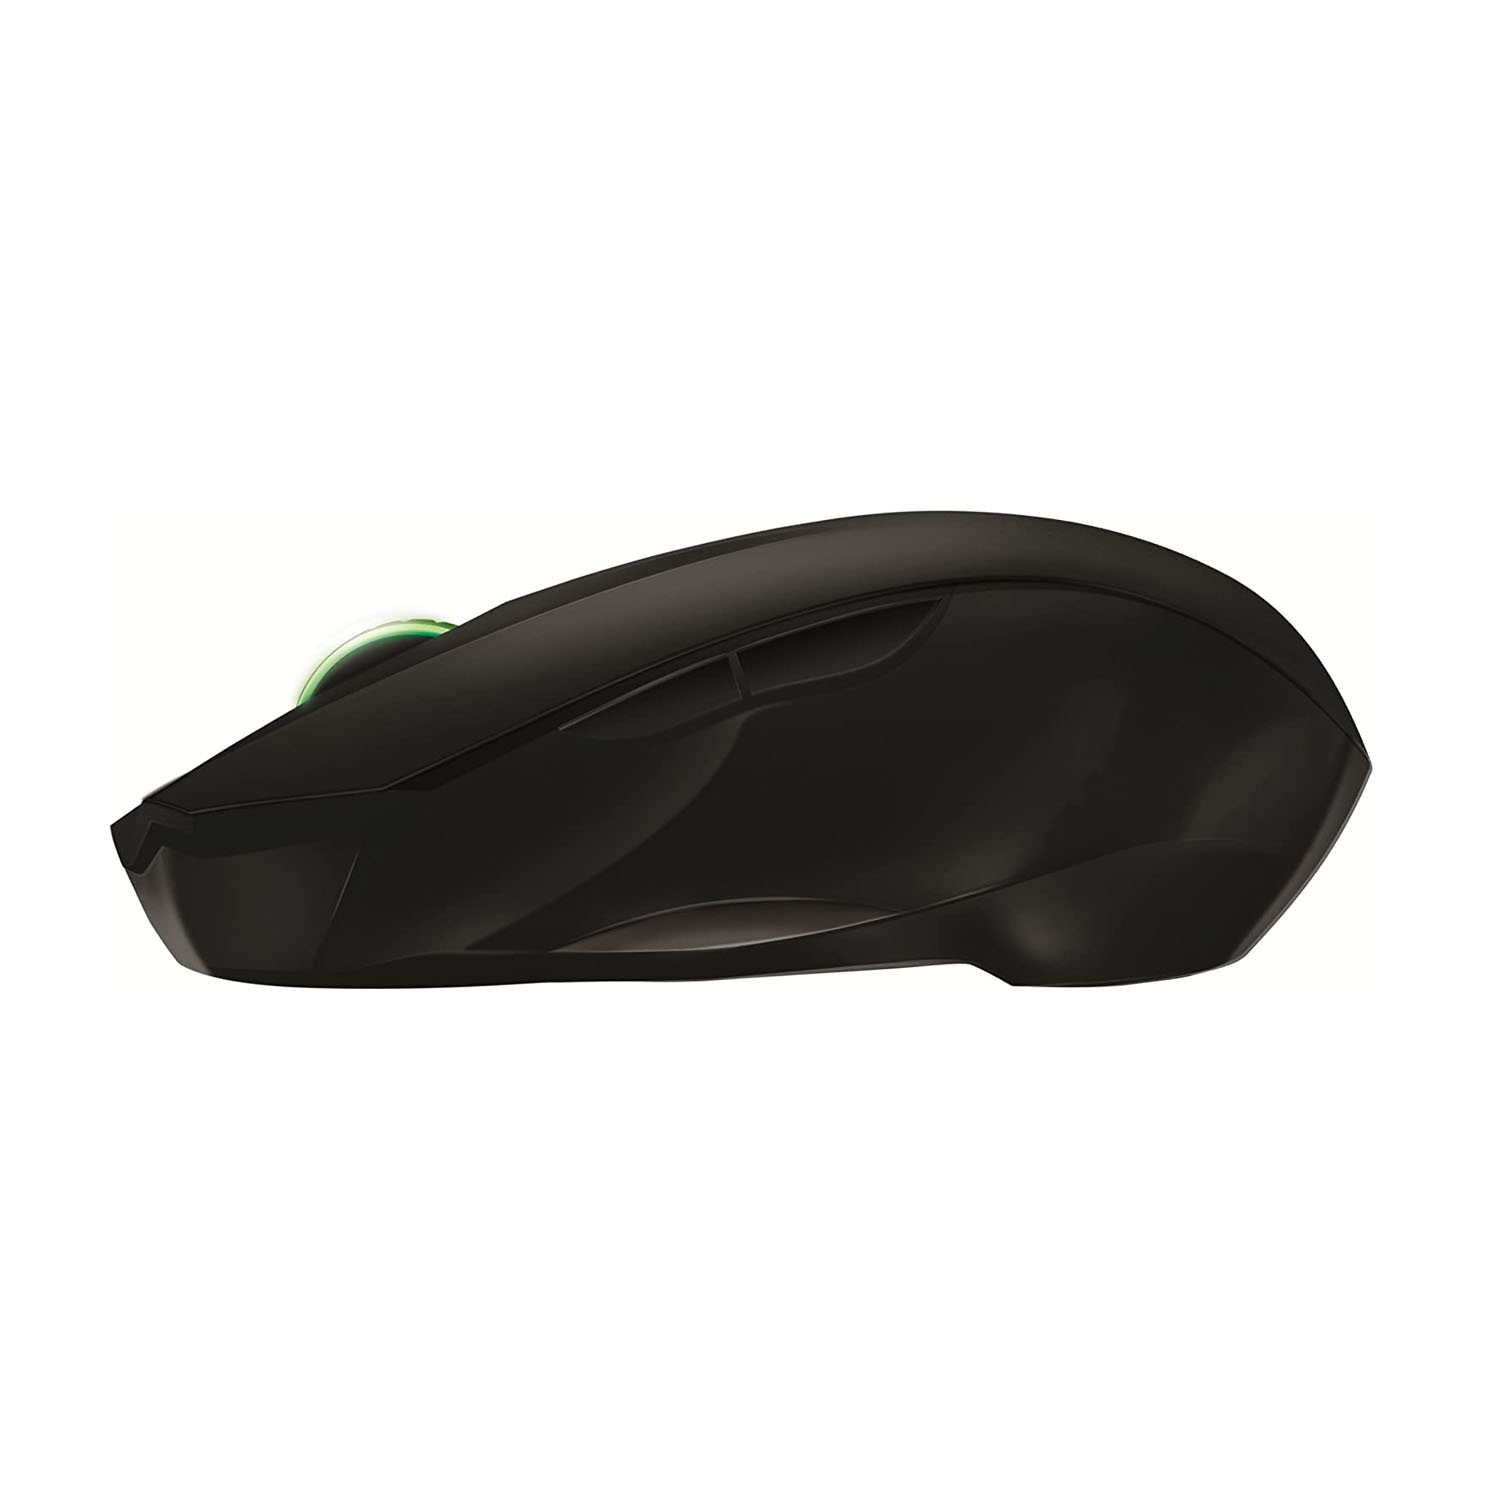 Orochi Bluetooth 2013 Gaming Mouse-3